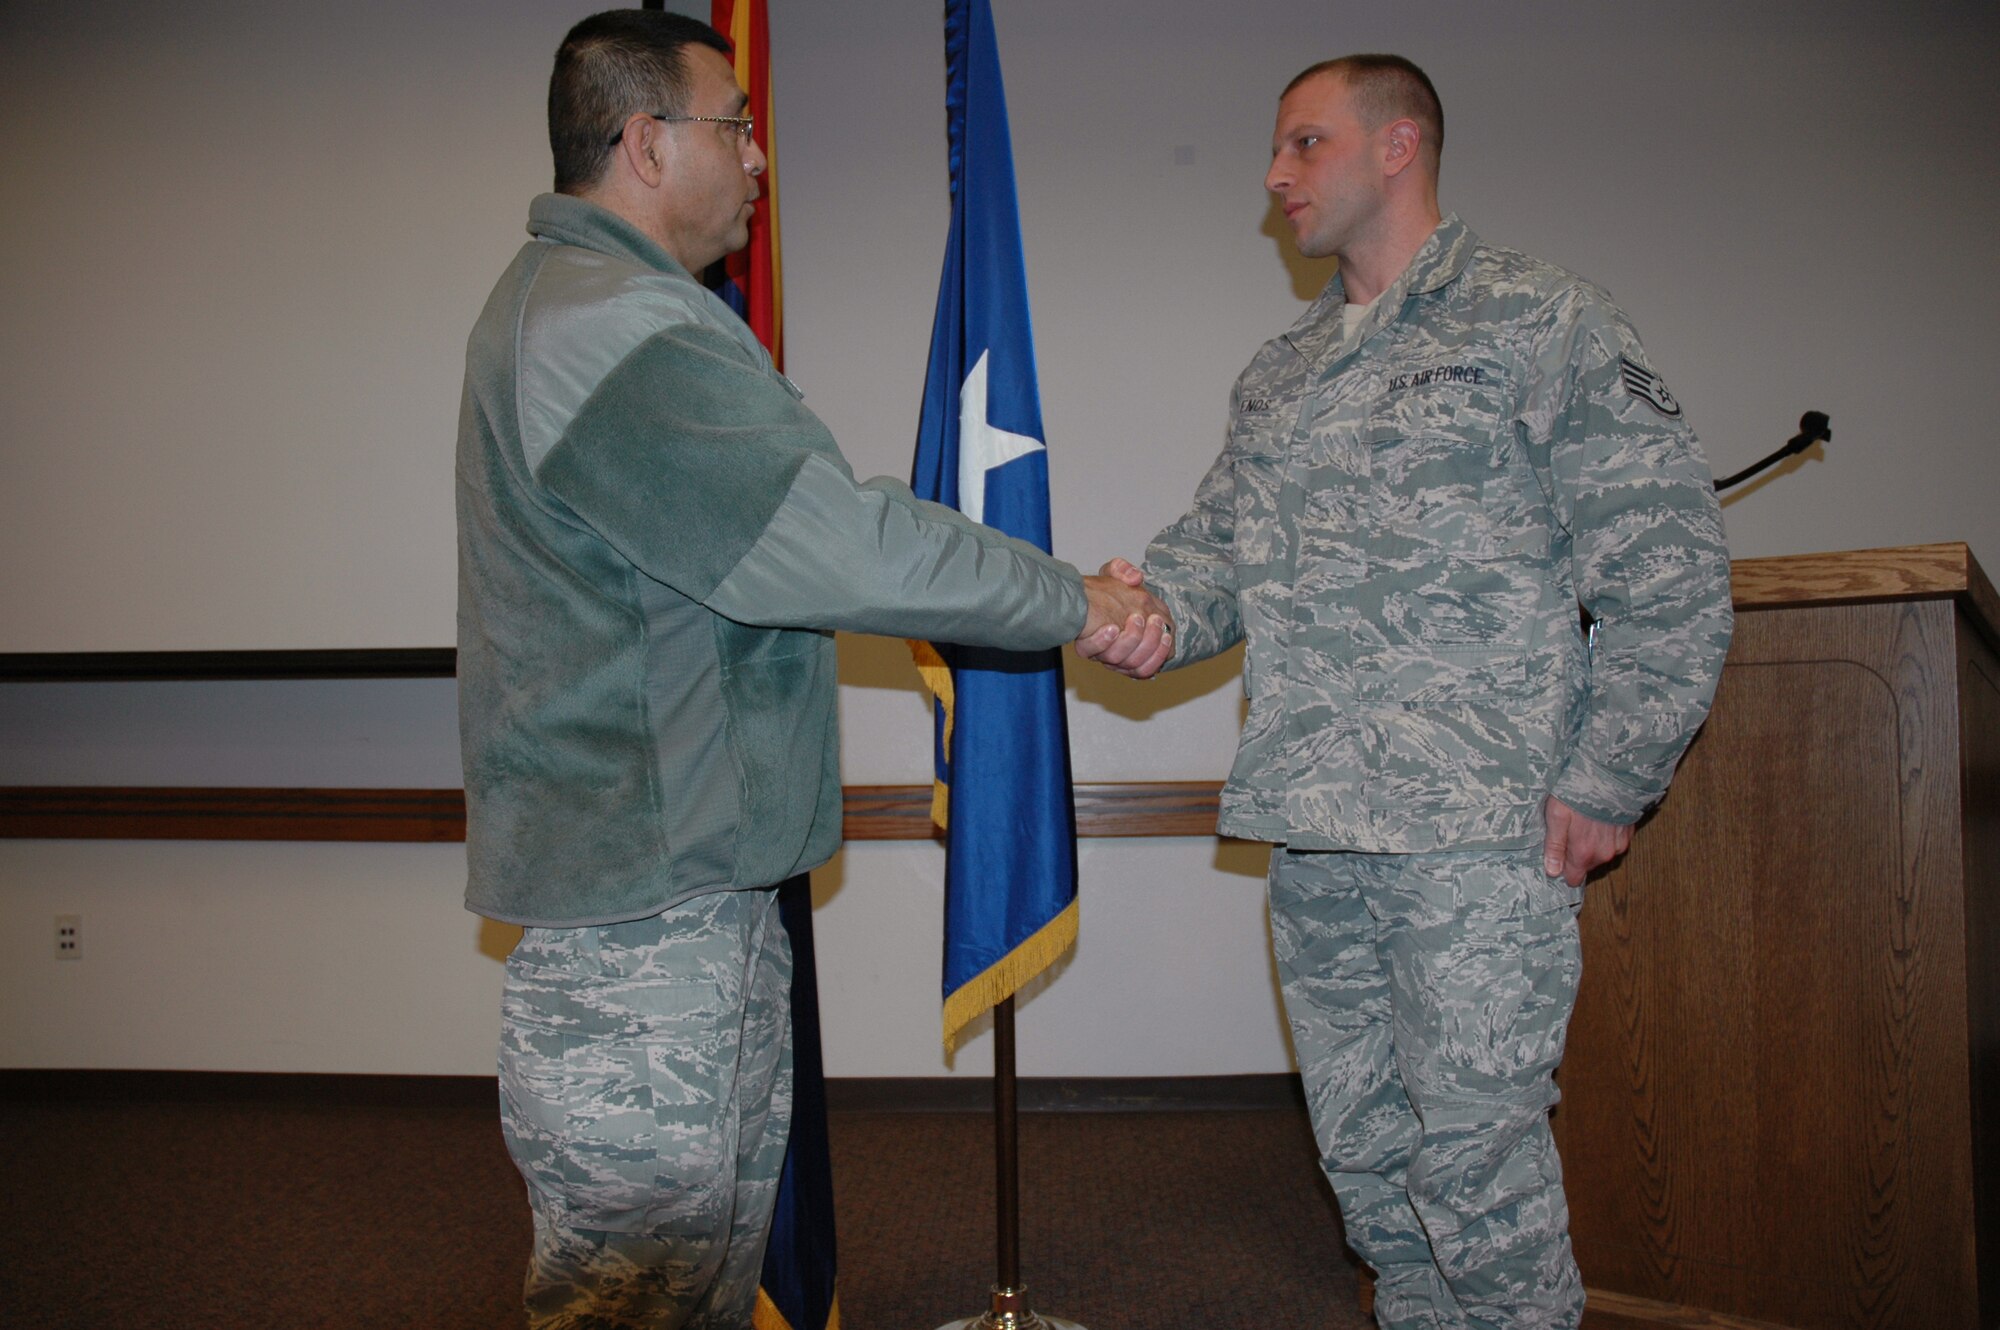 Brig. Gen. Jose Salinas, Director, Joint Staff Arizona National Guard presents Staff Sgt. Christopher Enos, food specialist, 161st Force Support Squadron, Phoenix, with his personal coin for his hard work during the 161 FSS support of the 57th Presidential Inauguration in Washington D.C. during the squadrons commanders call Feb. 10, 2013. (U.S. Air Force photo by Staff Sgt. Michael Matkin/Released)